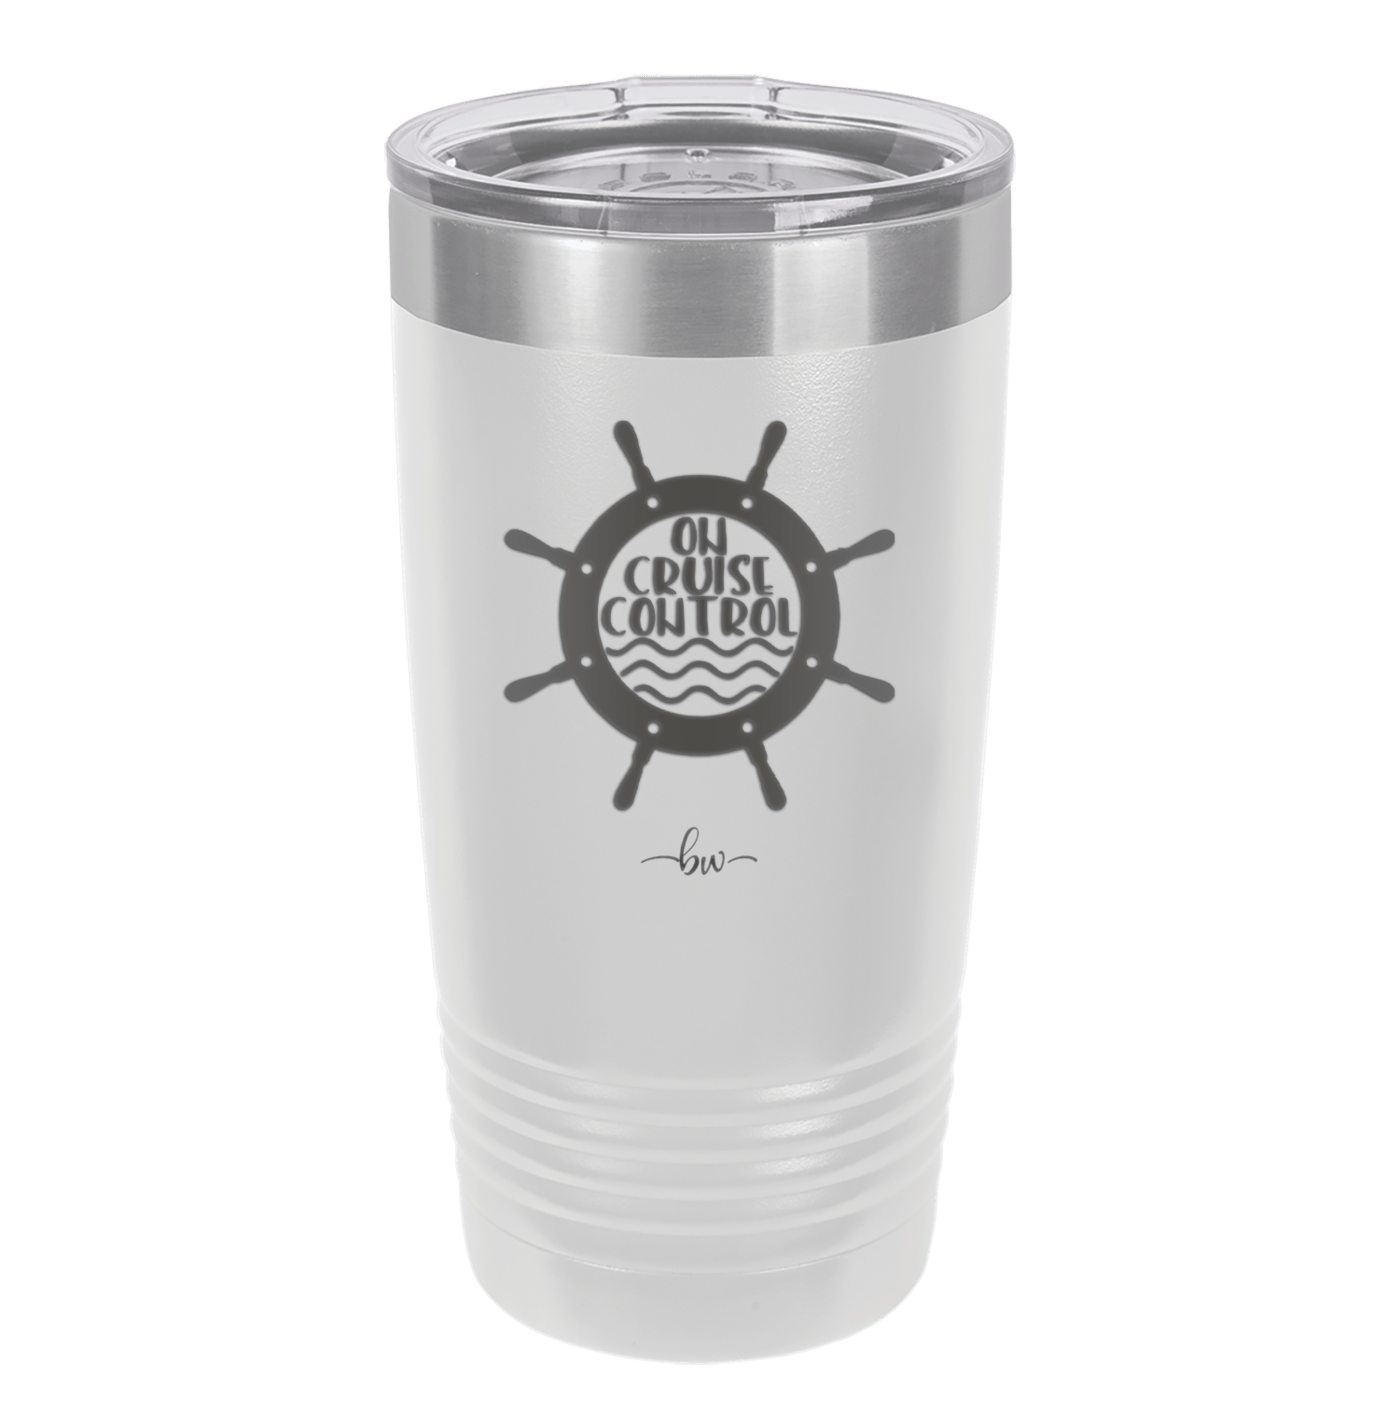 On Cruise Control Ships Wheel - Laser Engraved Stainless Steel Drinkware - 1432 -